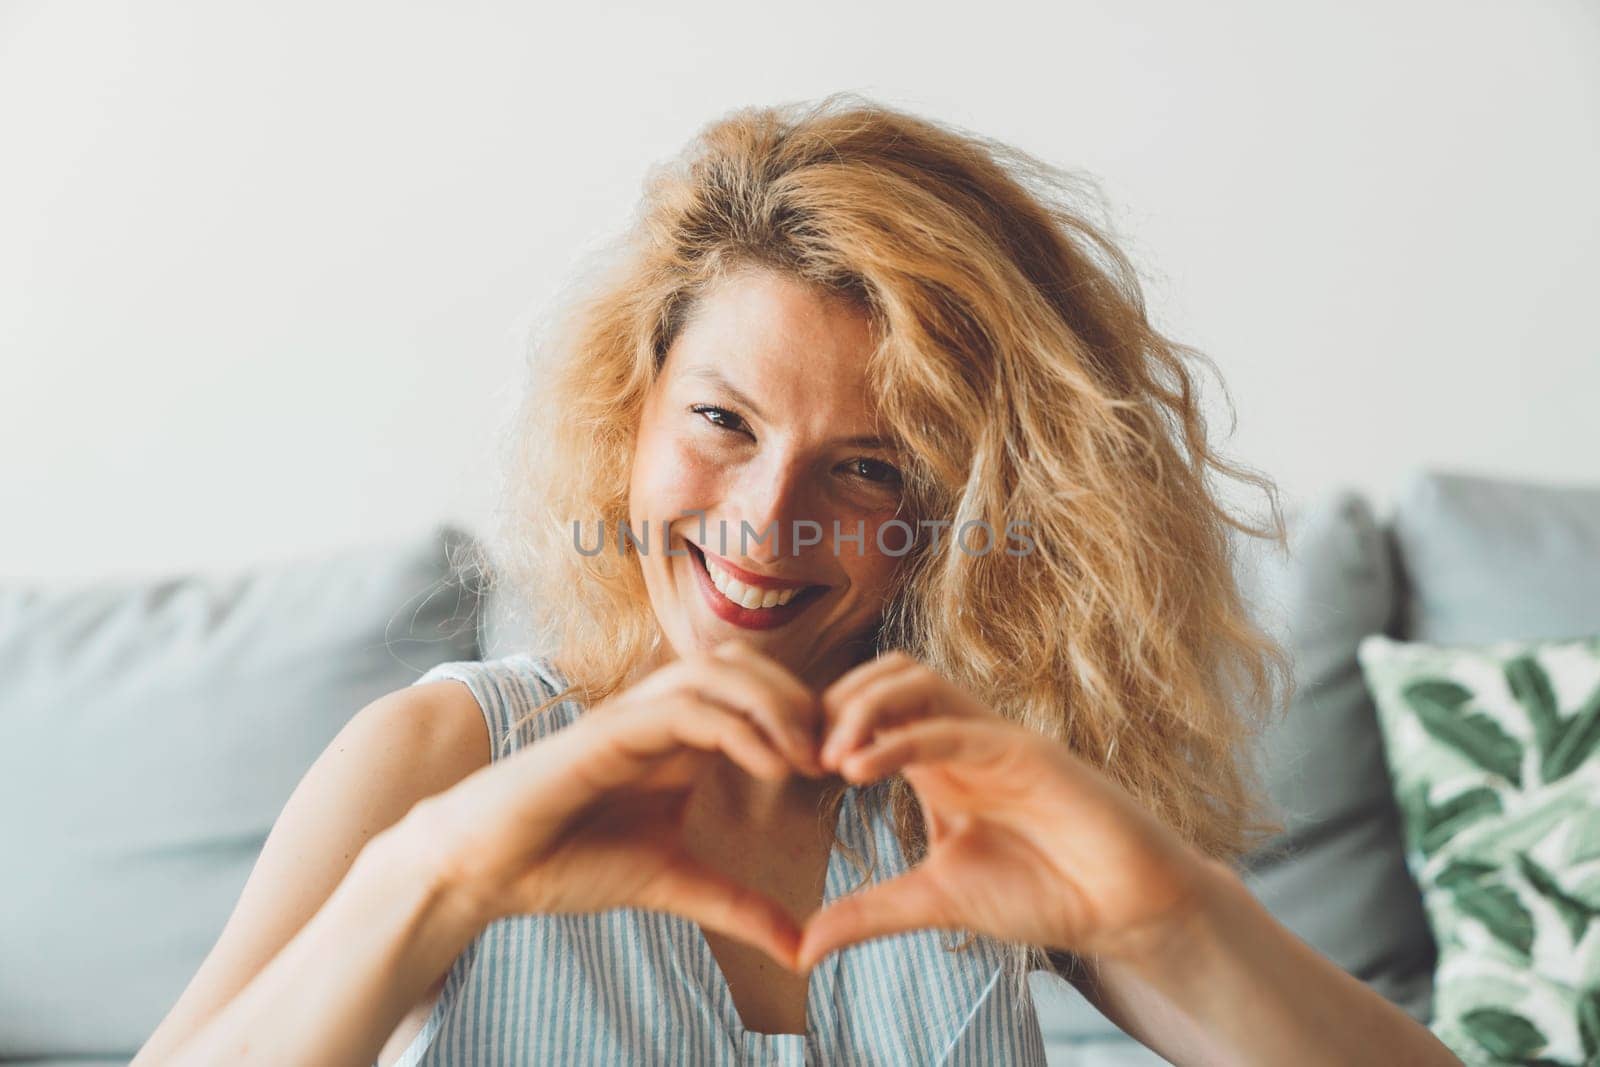 Waist up portrait of a smiling woman with curly hair holding hands in a heart shape by VisualProductions